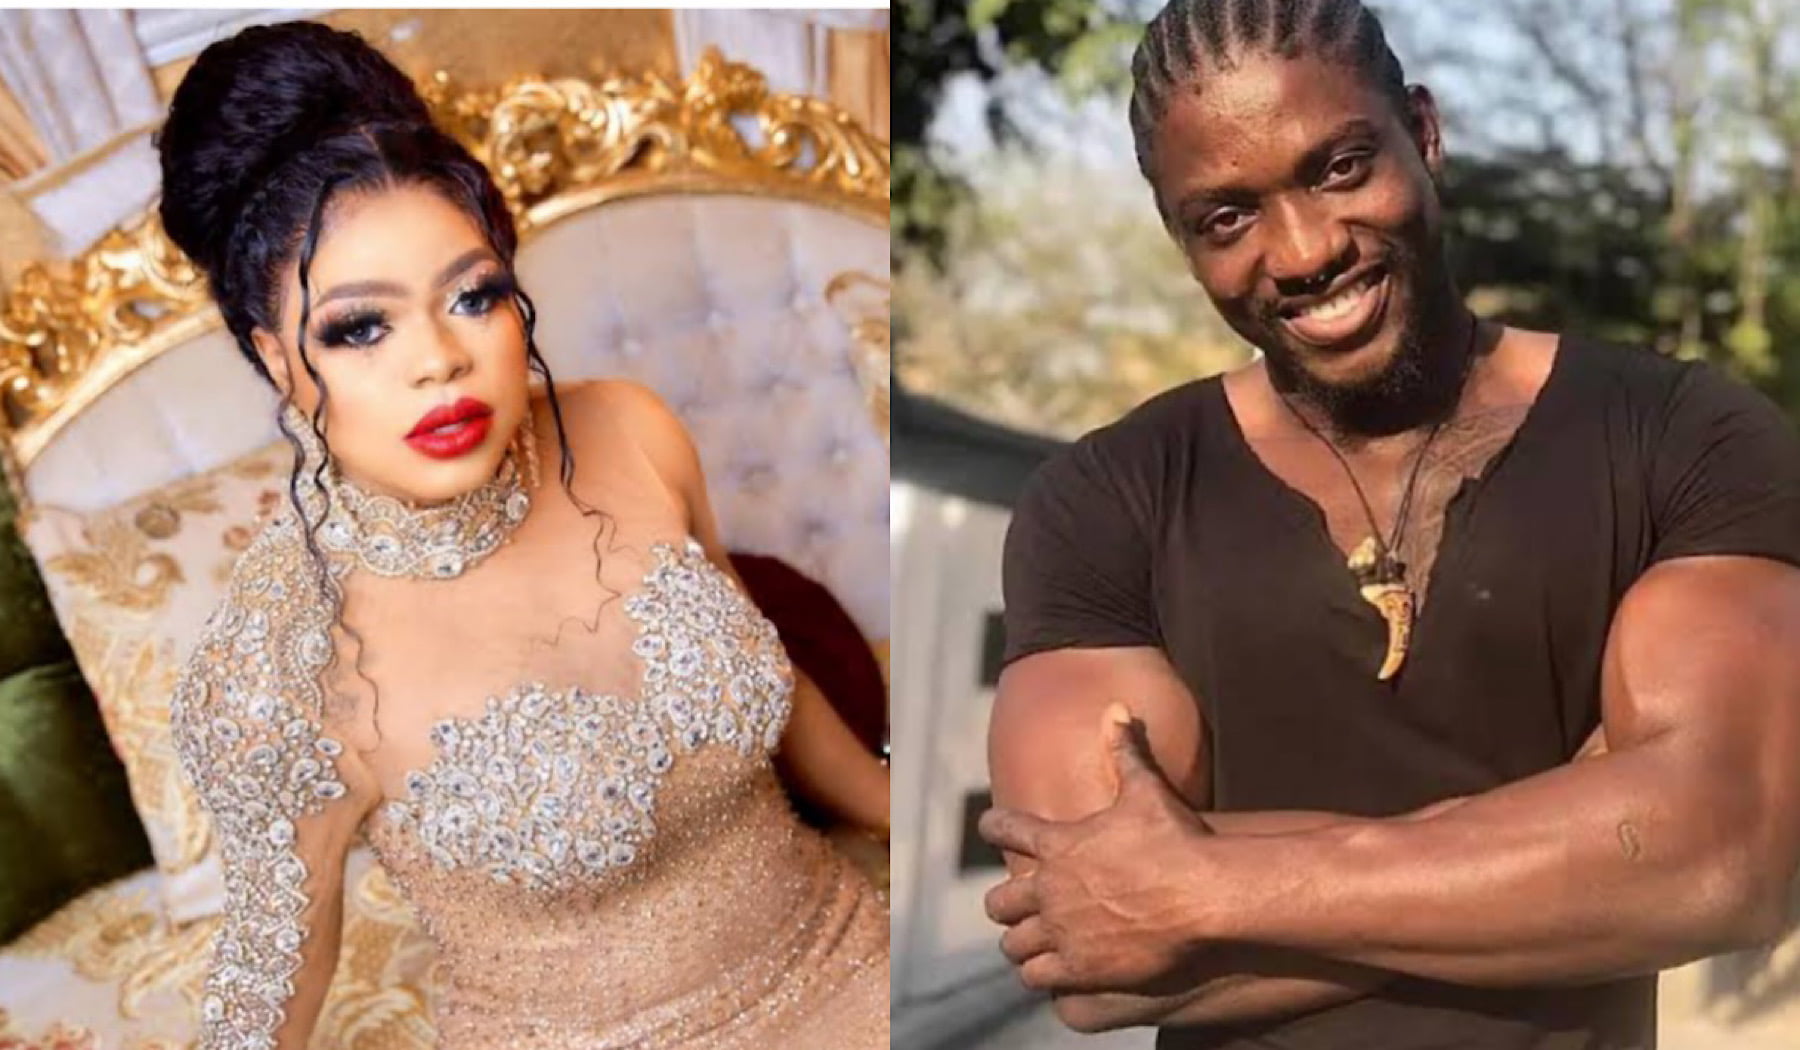 “Your Connections Seem To Be Failing” – VeryDarkMan Mocks Bobrisky Over His Jail Term